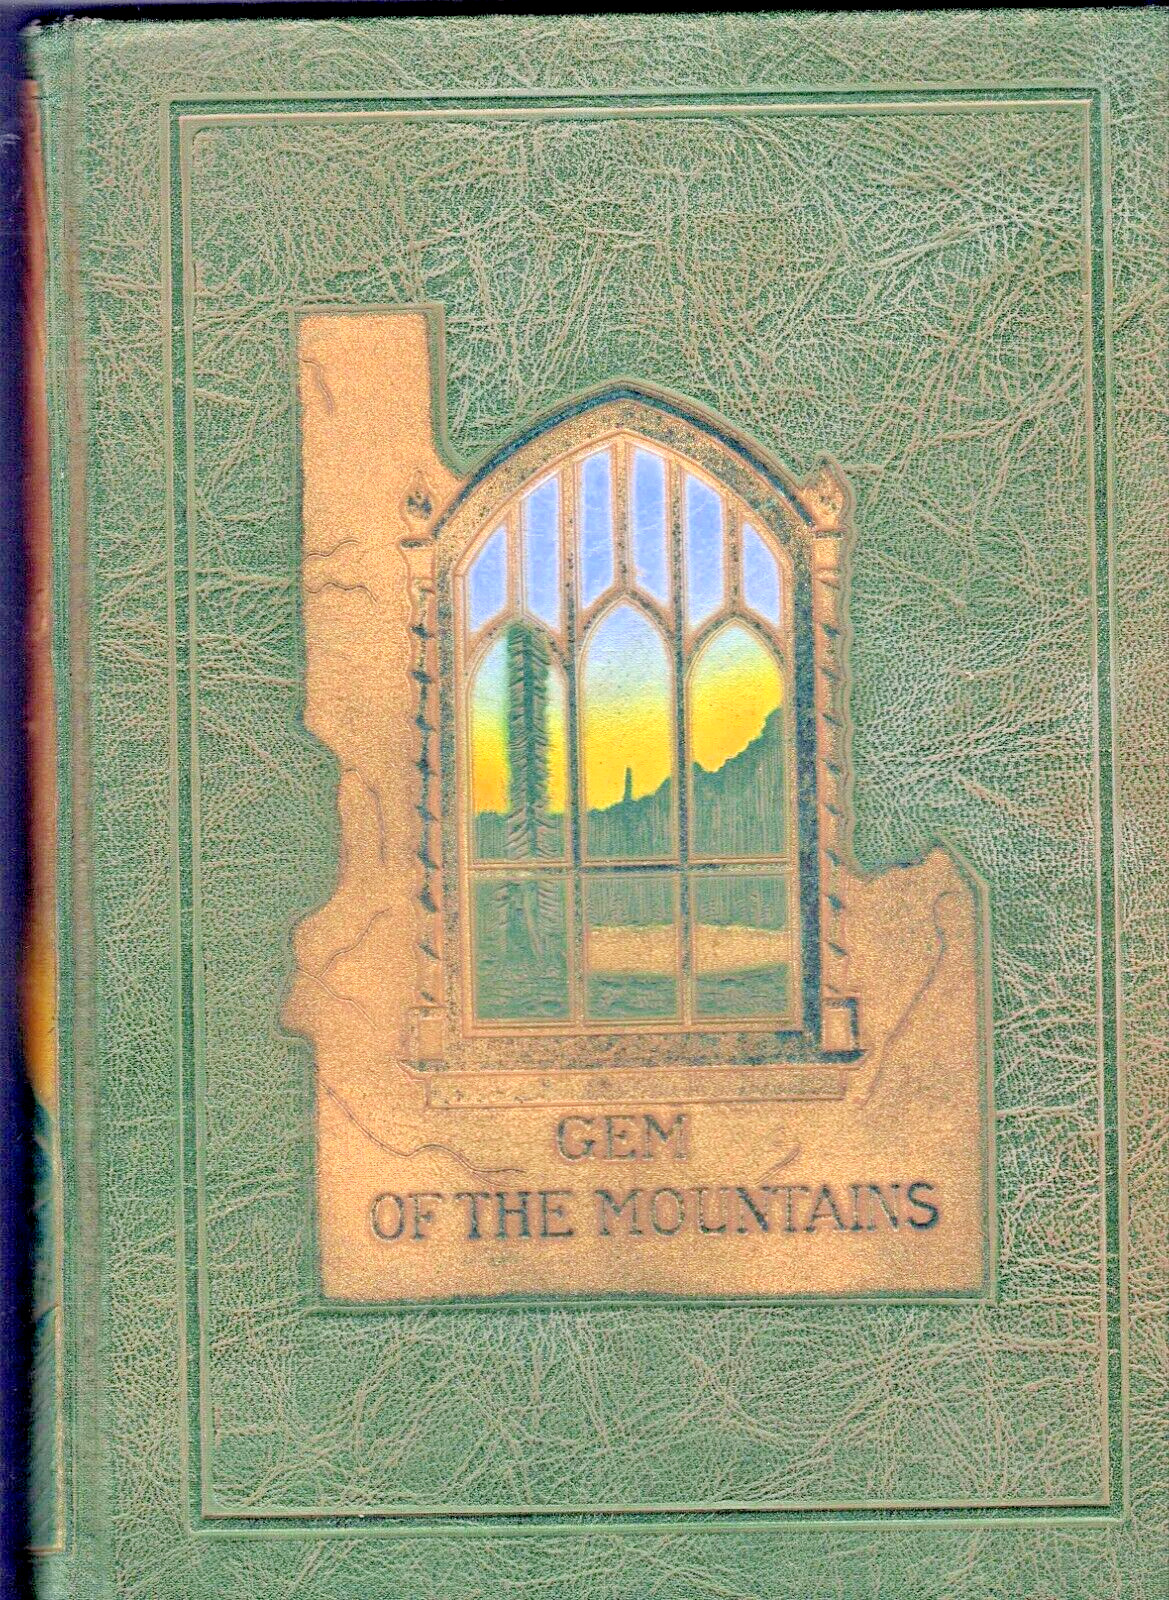 1926 University of Idaho Yearbook Gem of the Mountains, Moscow, Idaho